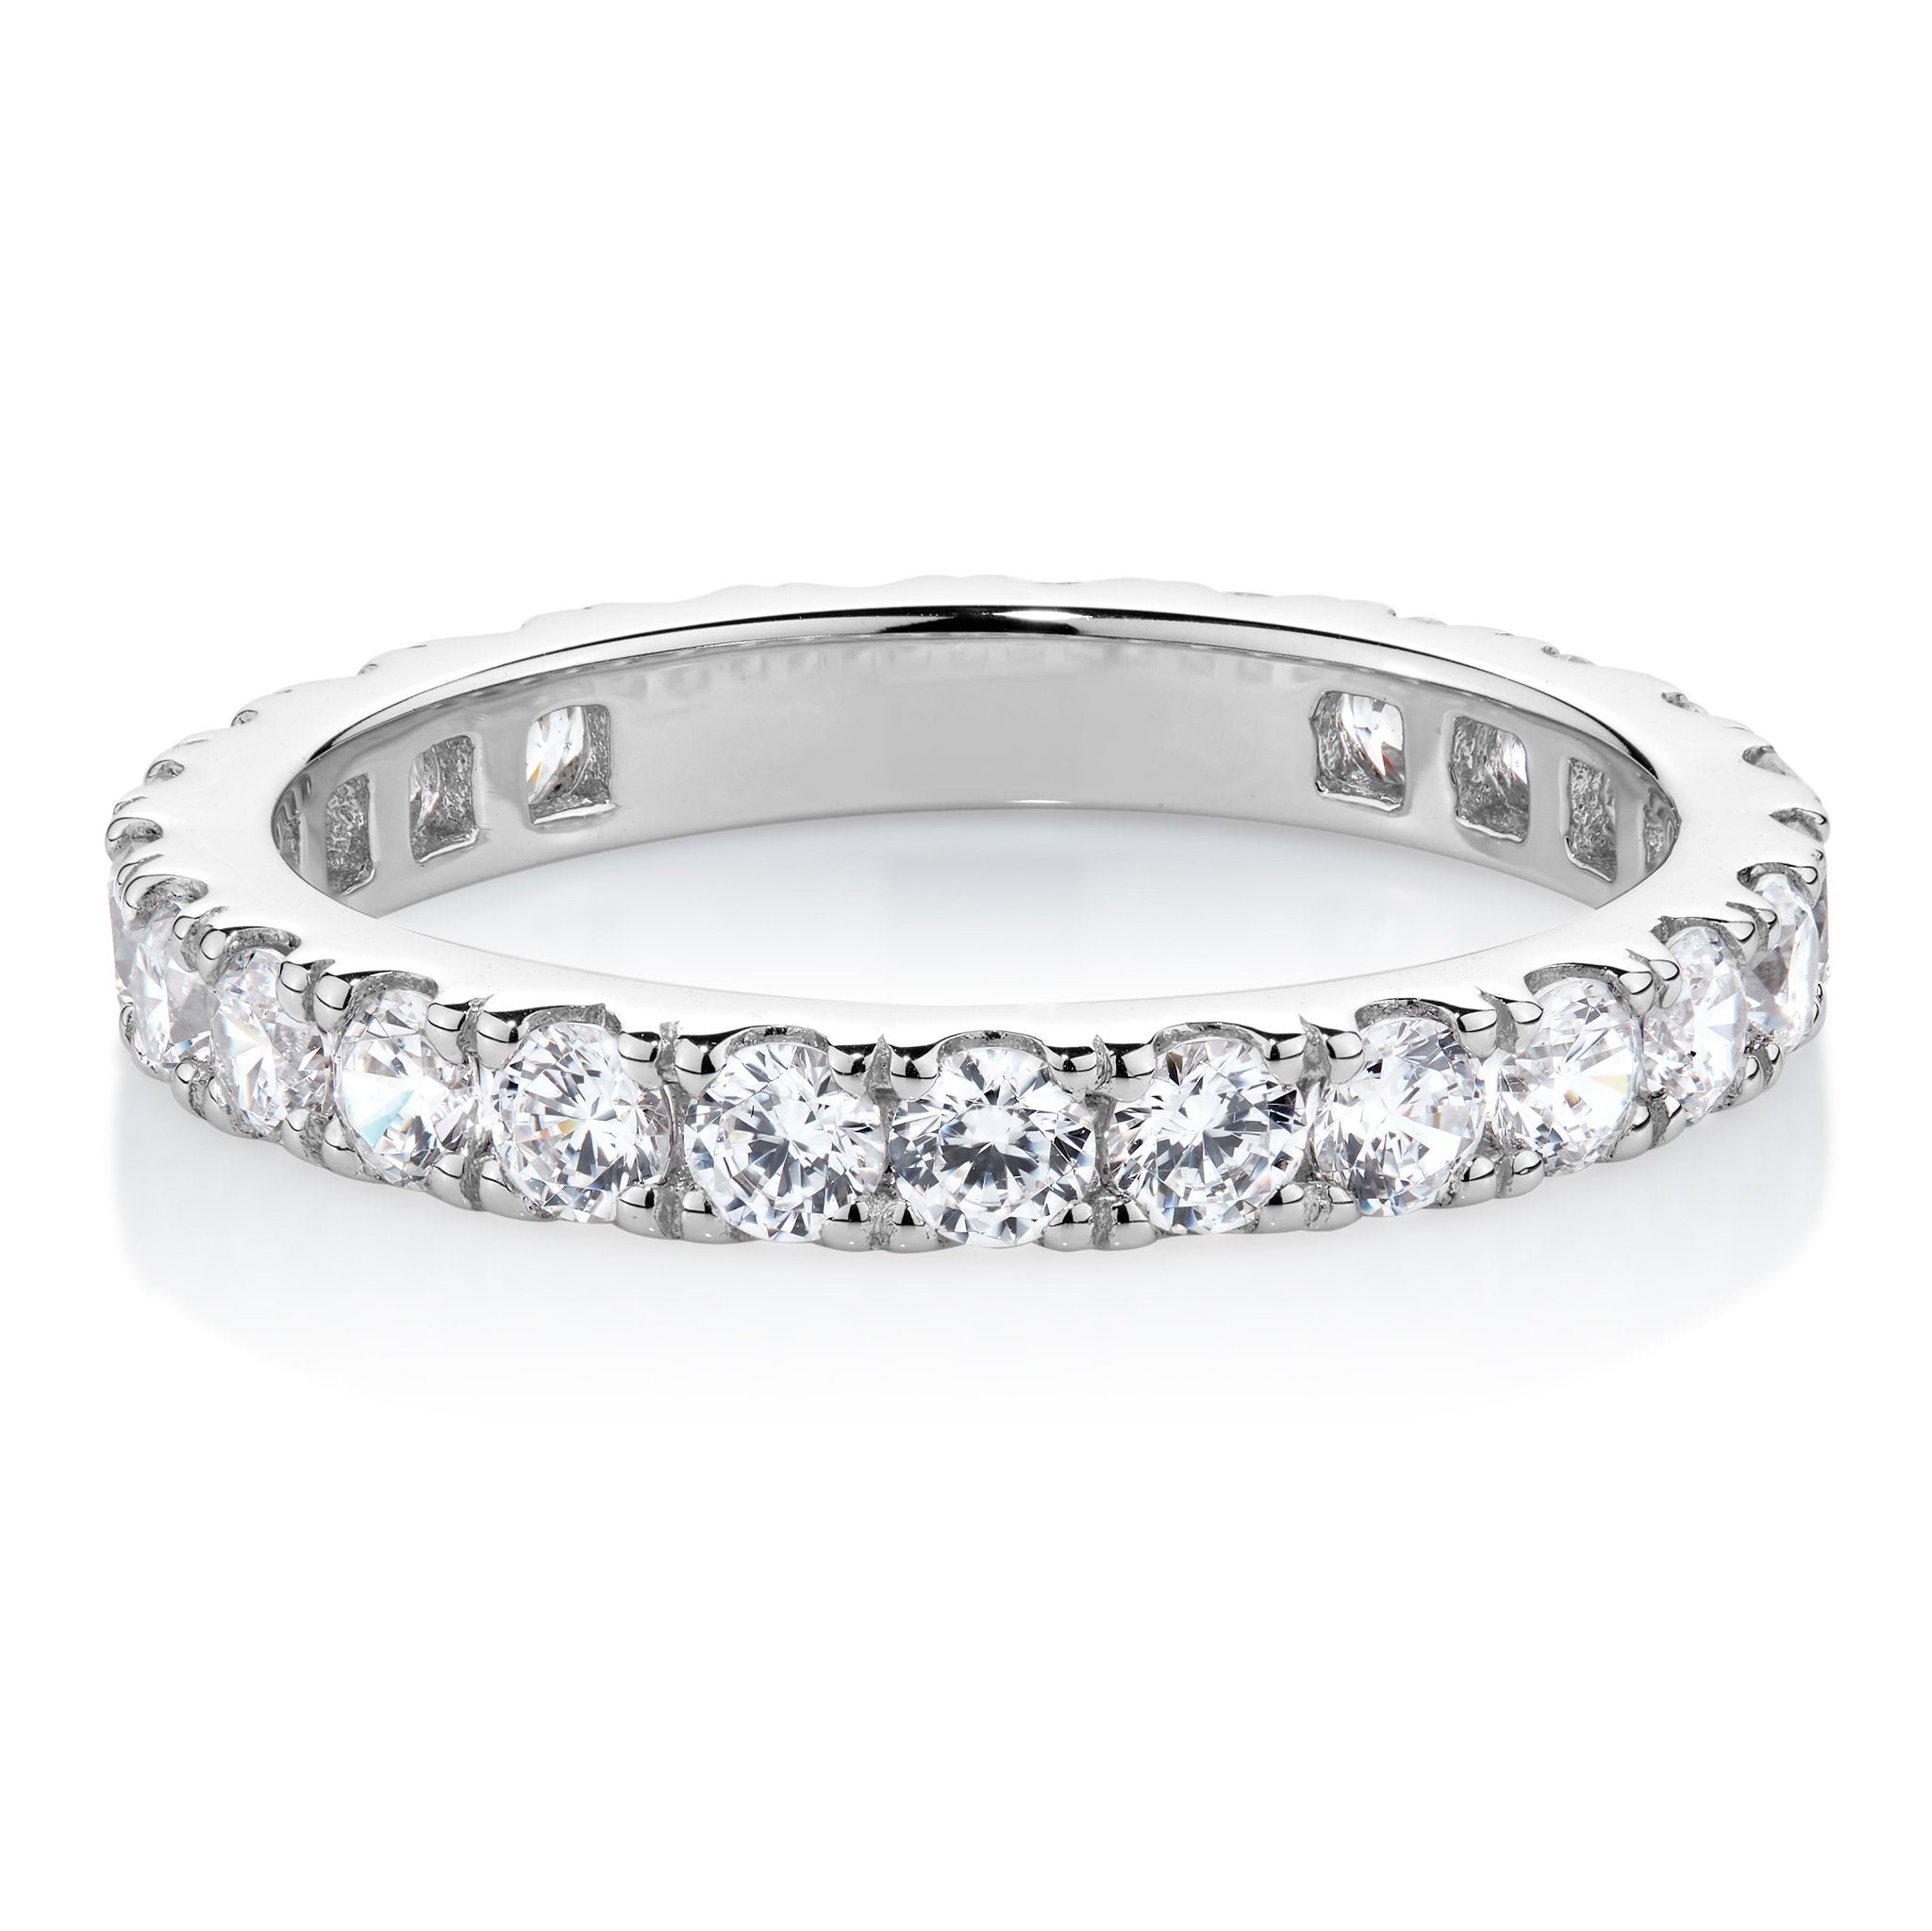 All-rounder eternity band with 1.56 carats* of diamond simulants in 14 carat white gold